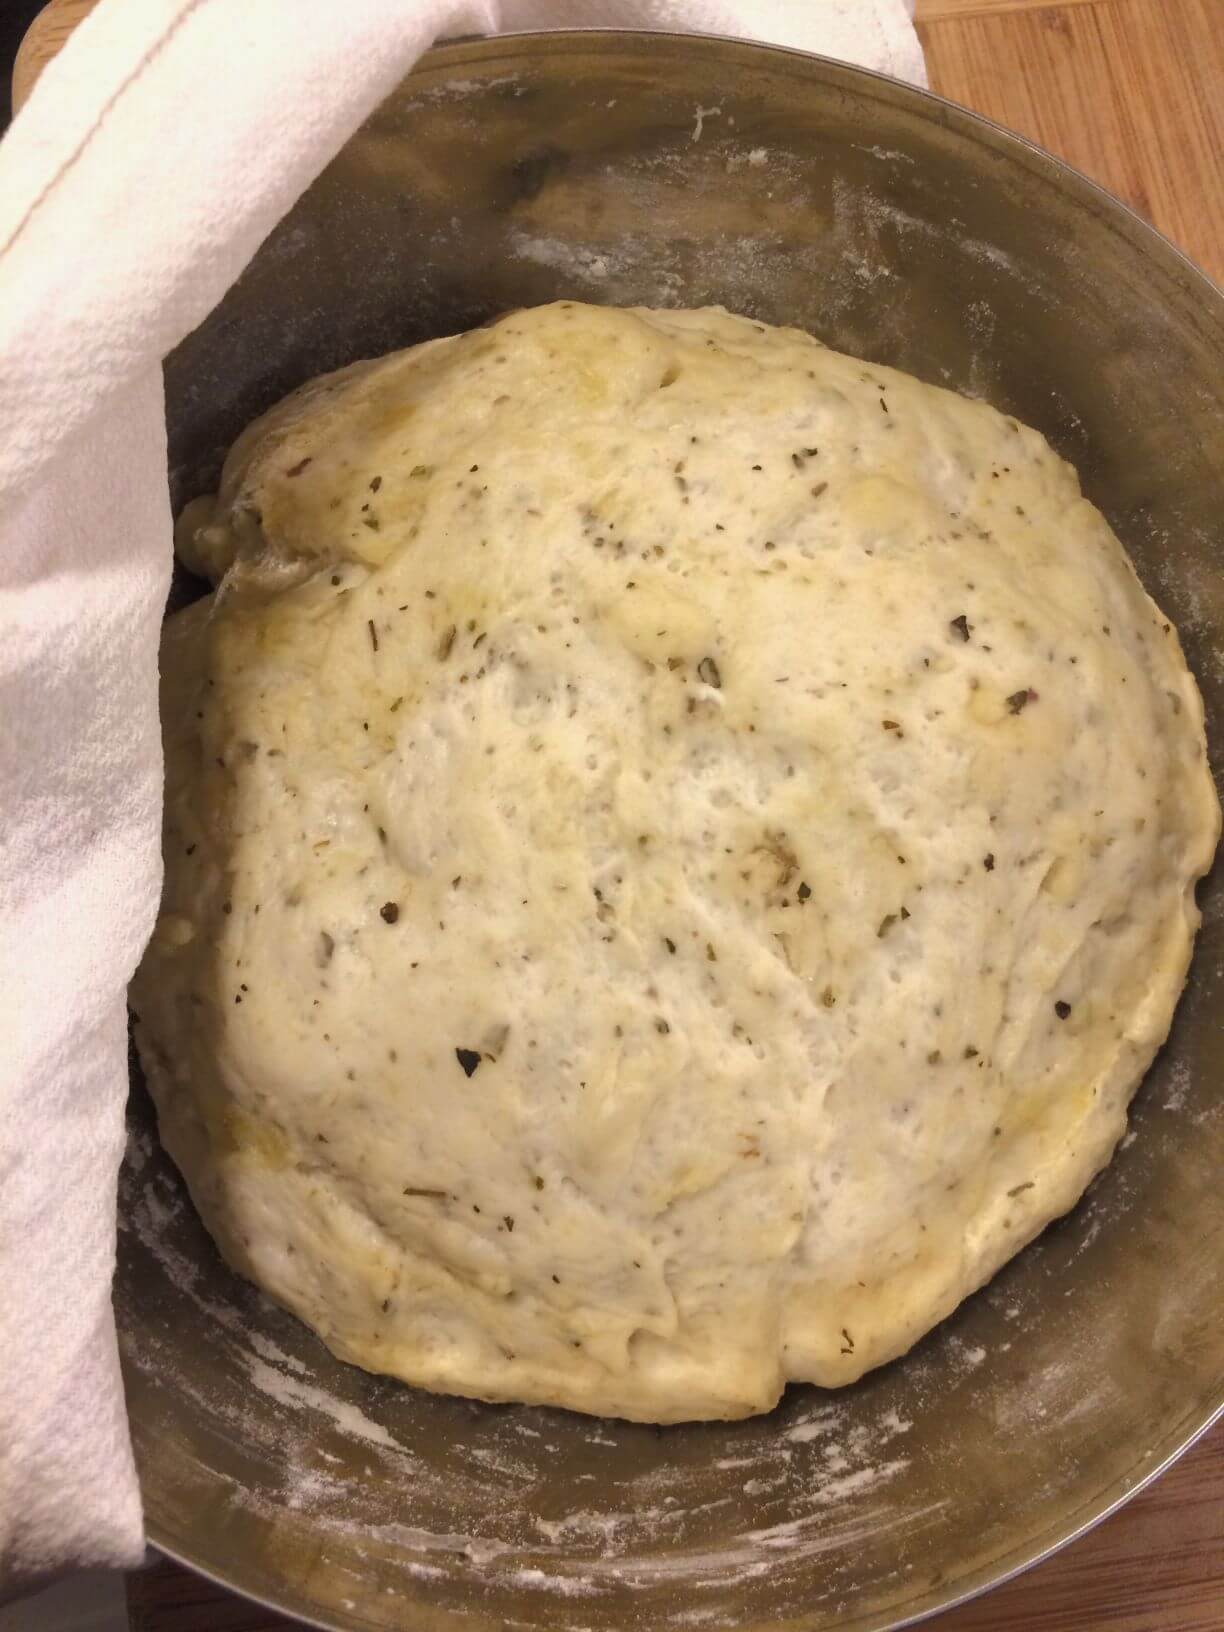 pizza dough with seasonings rising in a stainless steel bowl partially covered with tea towel, all on a wooden cutting board